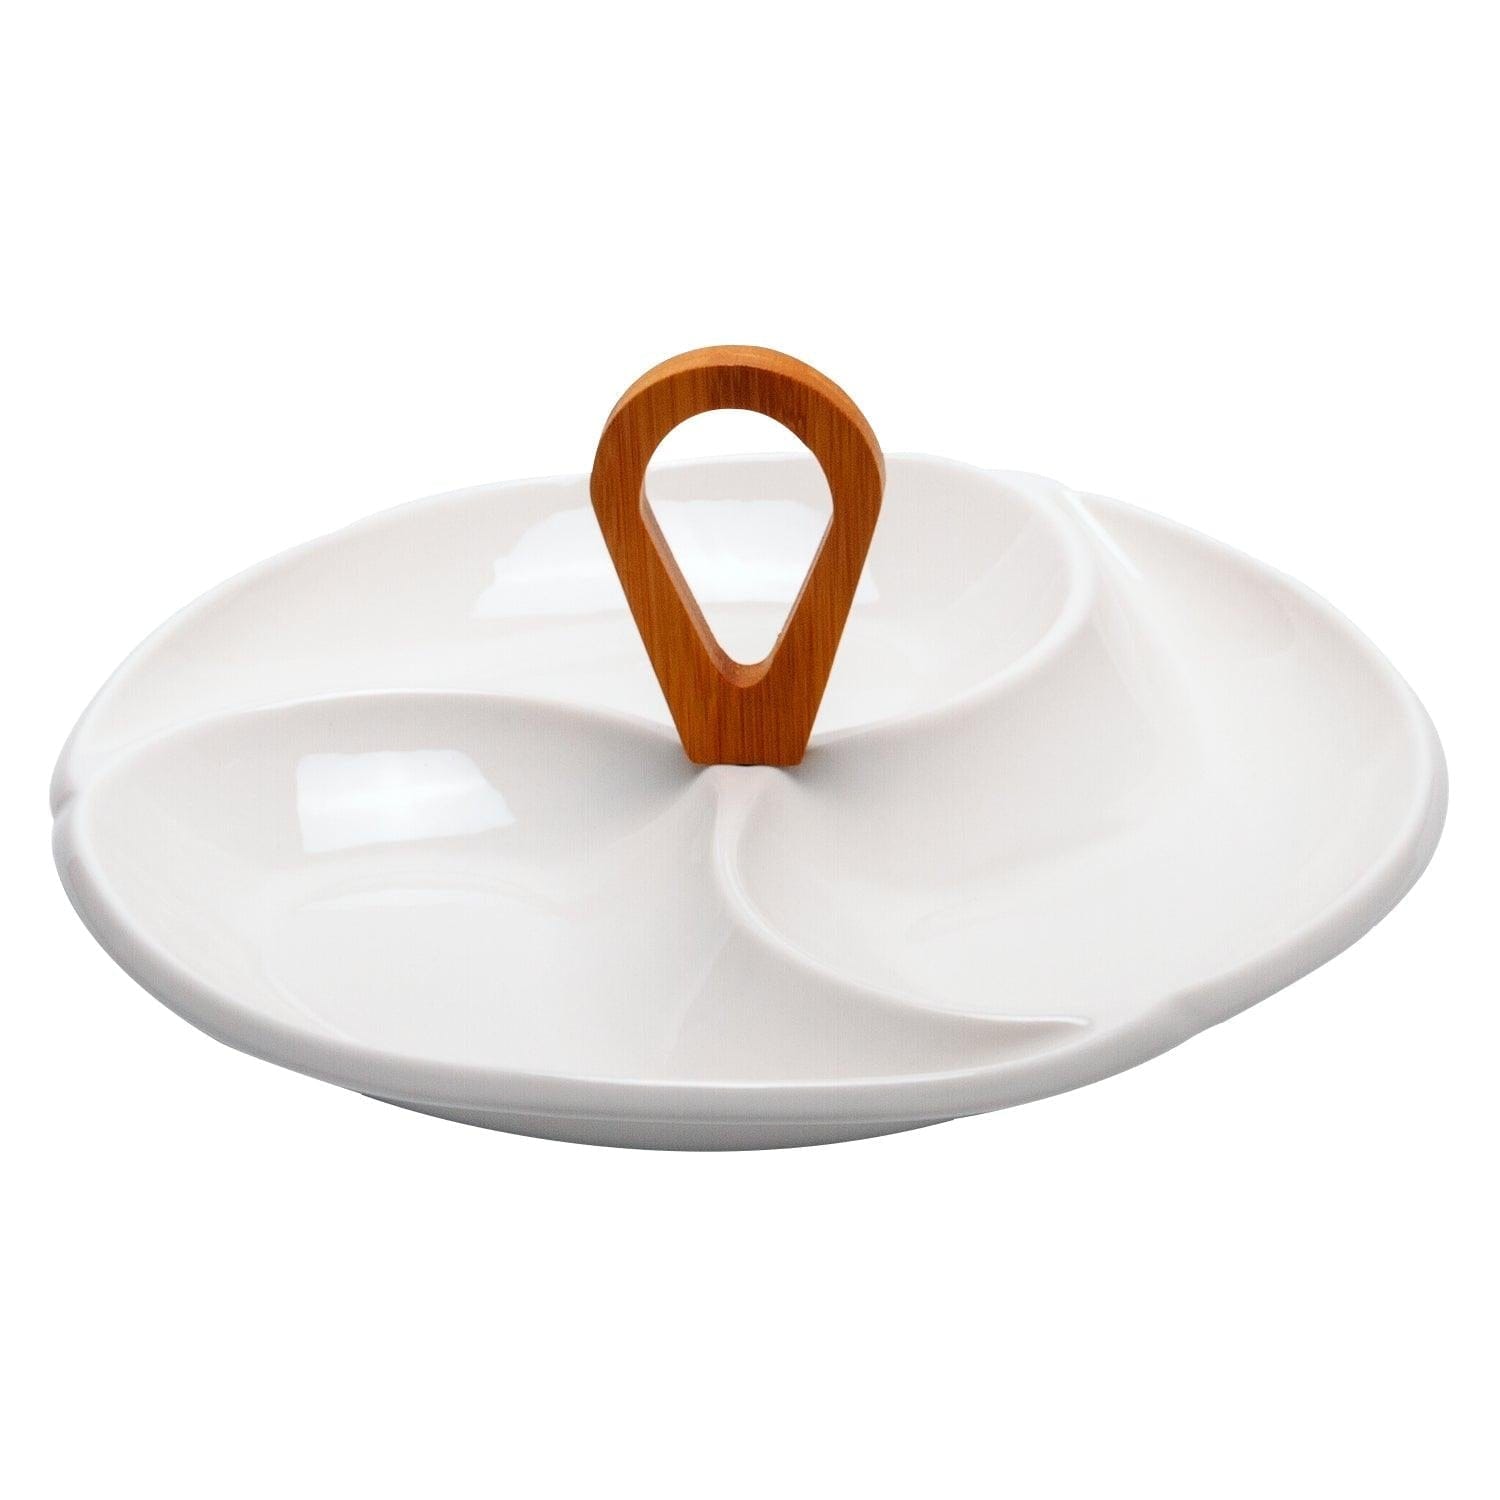 3 Compartment Ceramic & Wood Swirls Platter with Wooden Handle